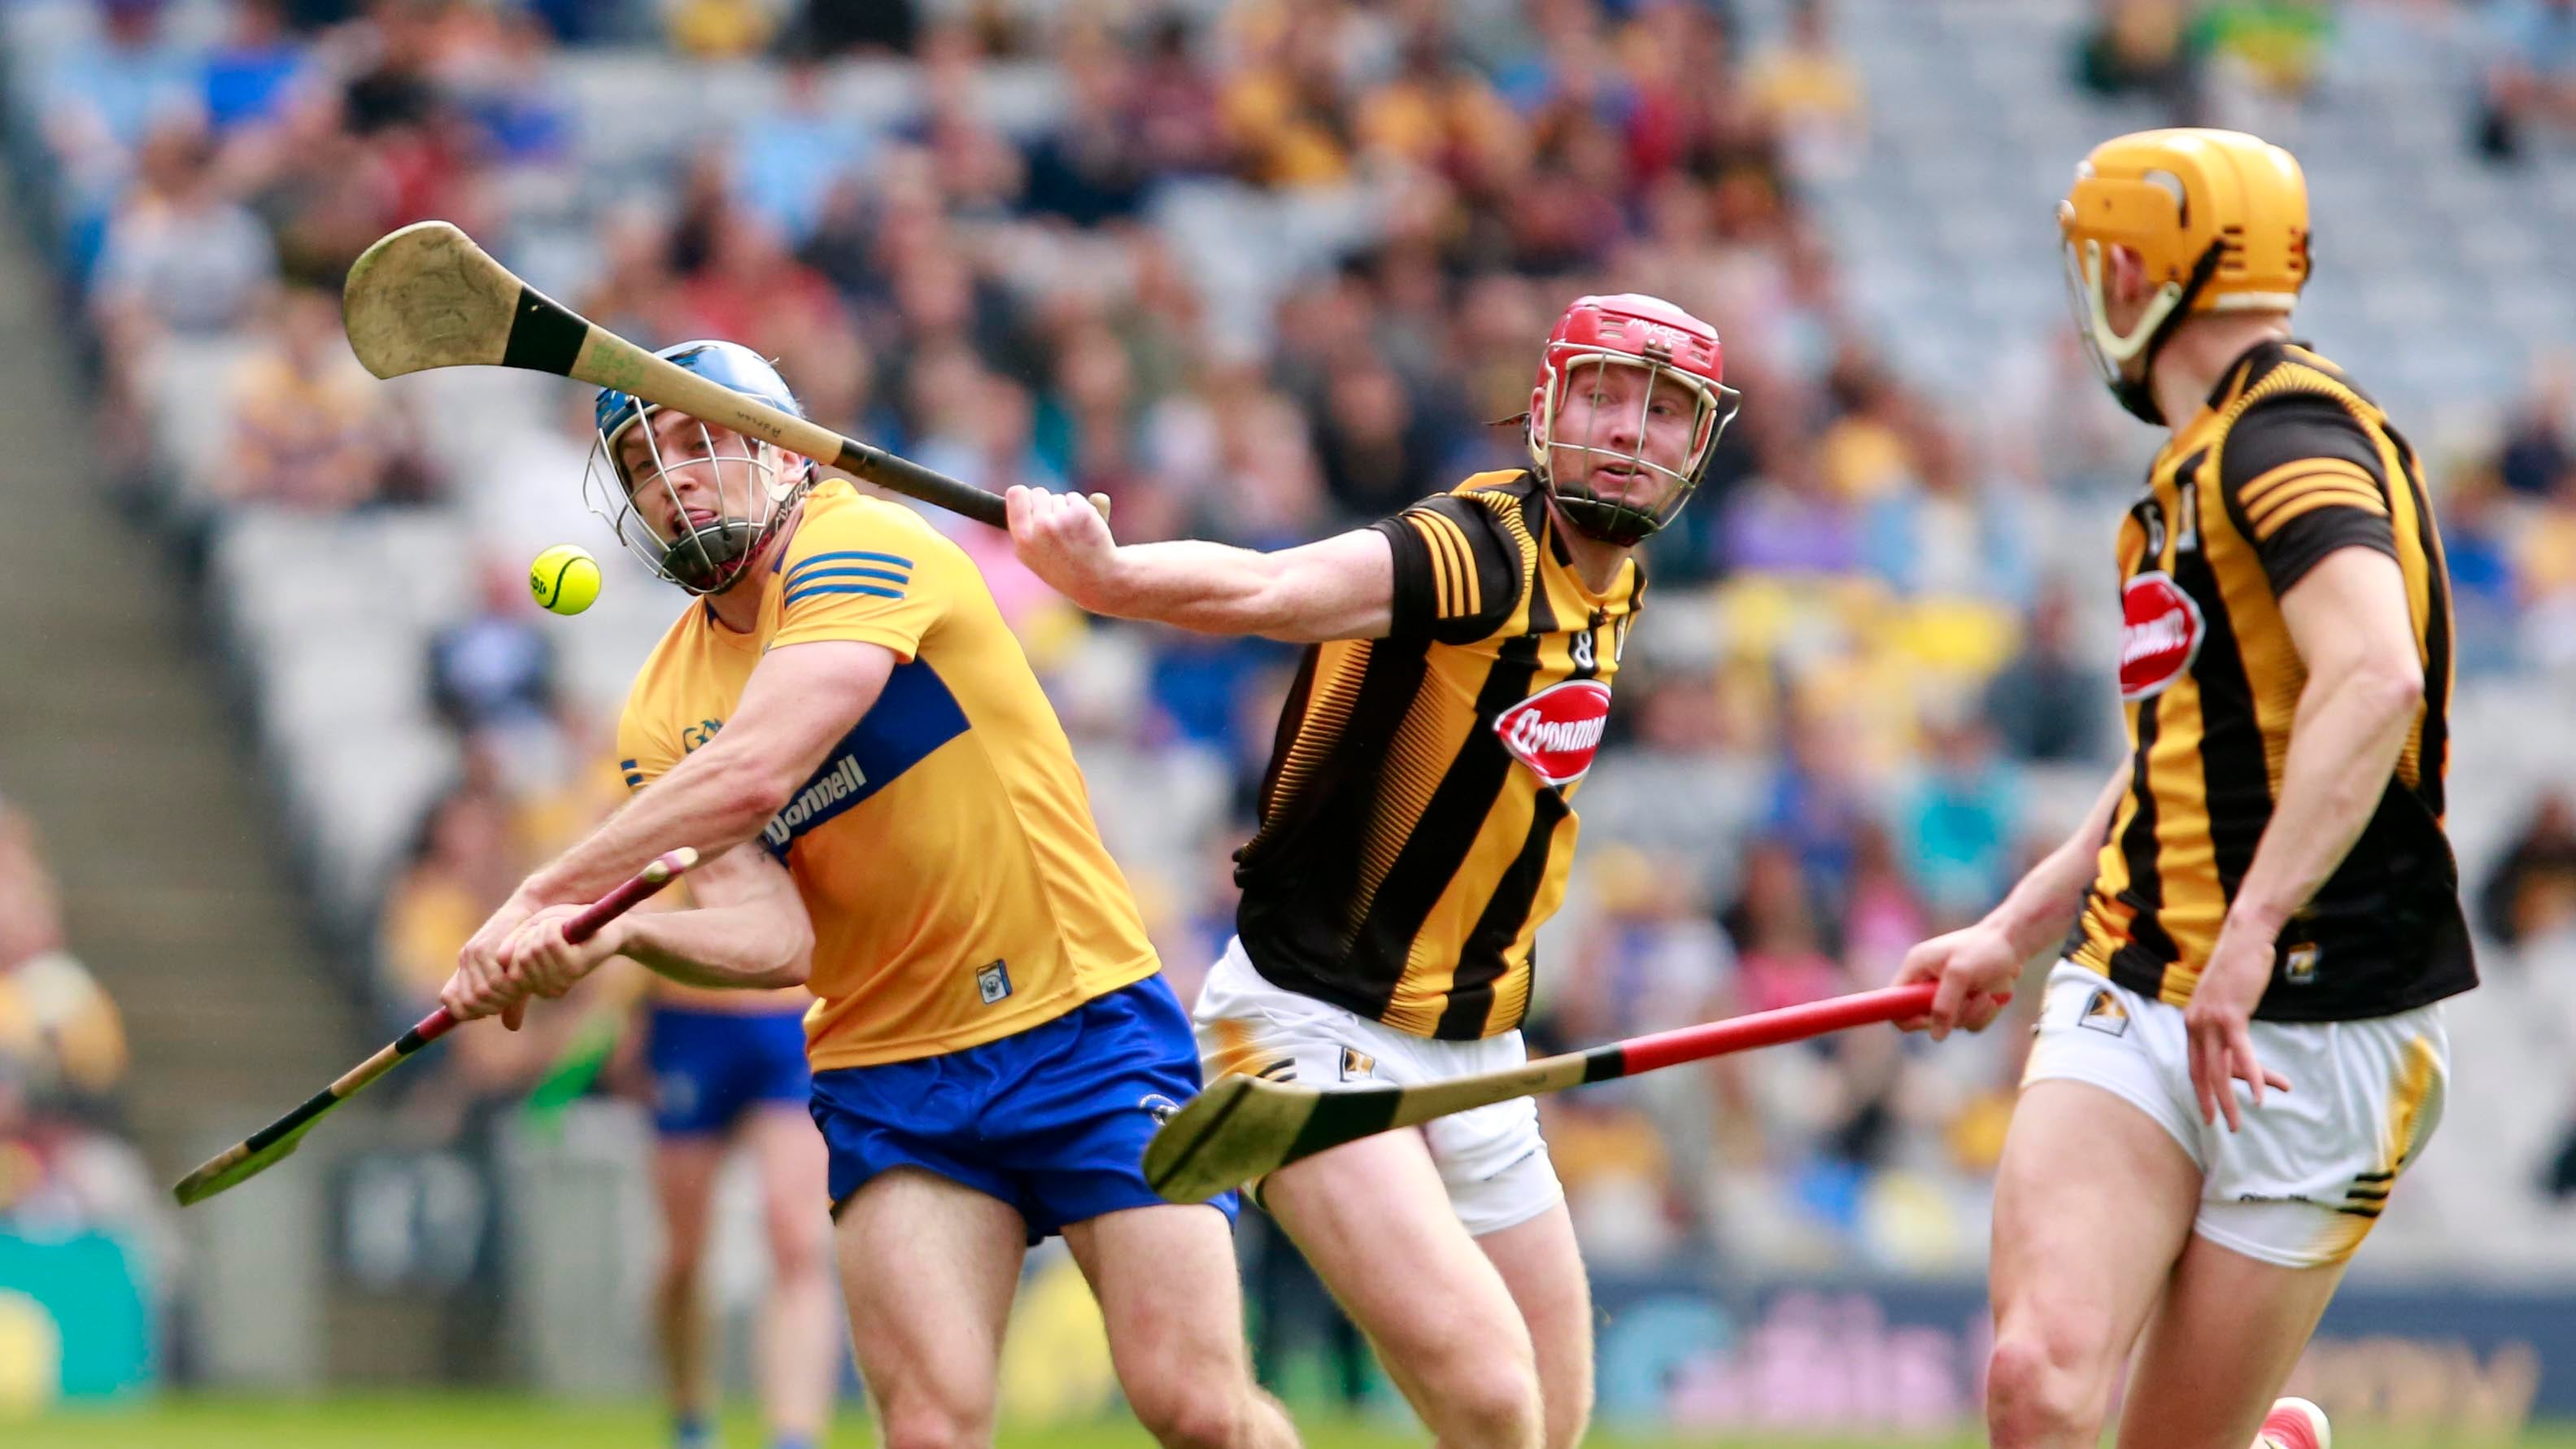 Clare and Kilkenny hurling match